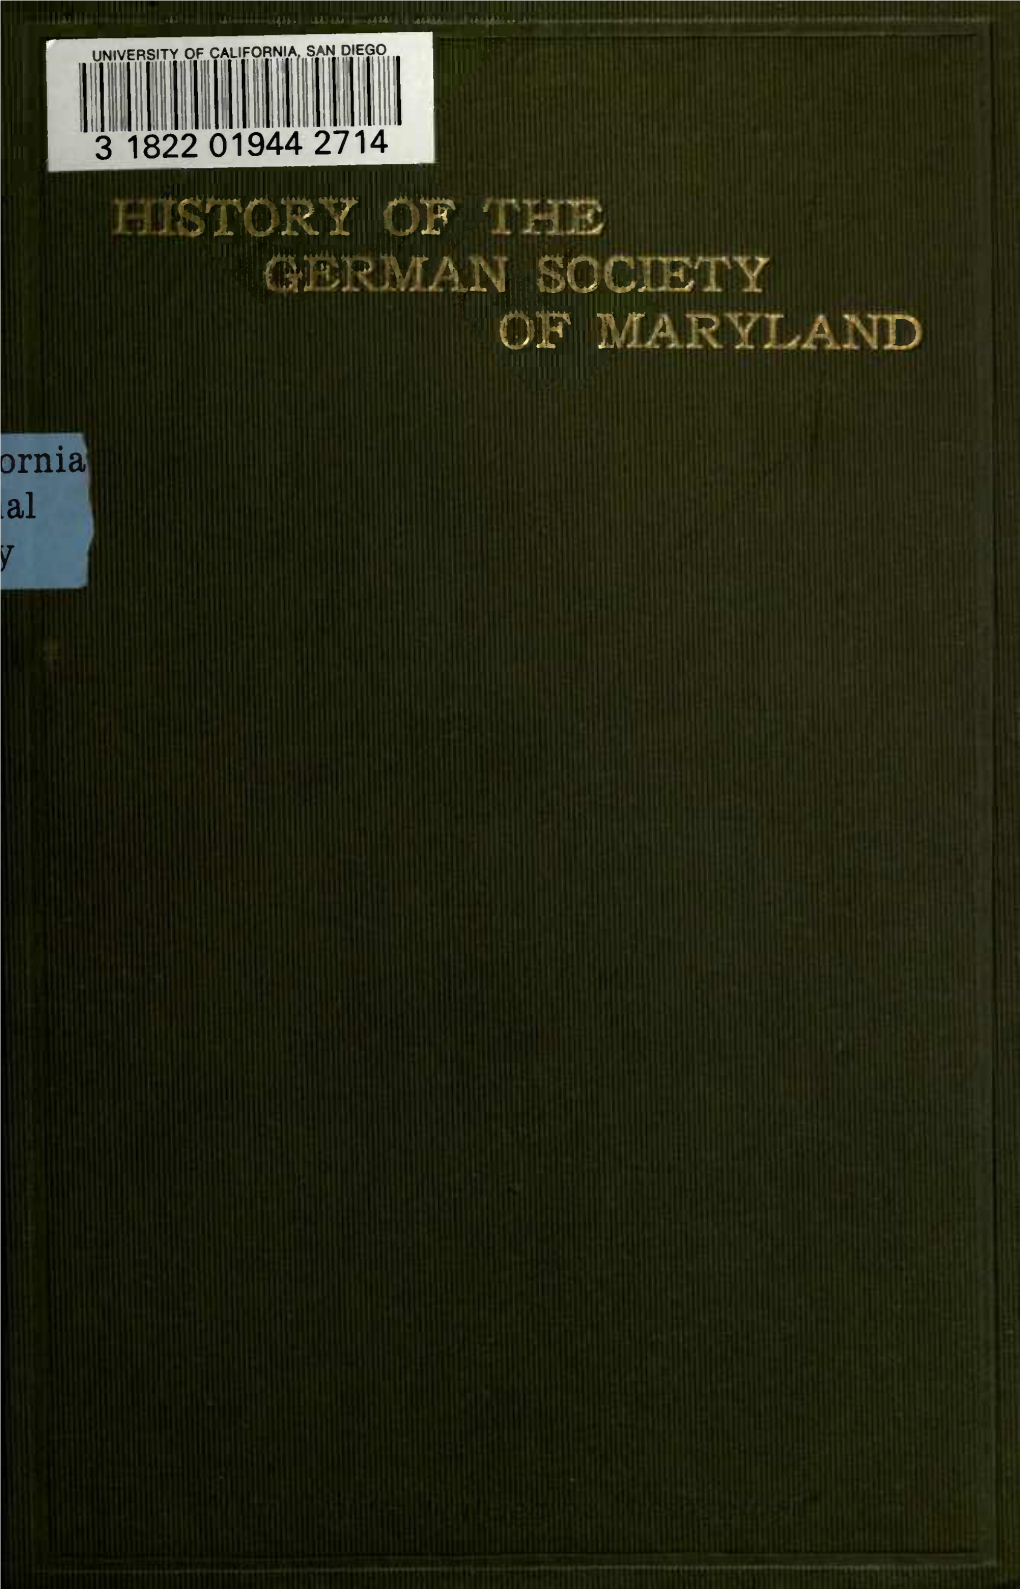 History of Germans in Maryland, P